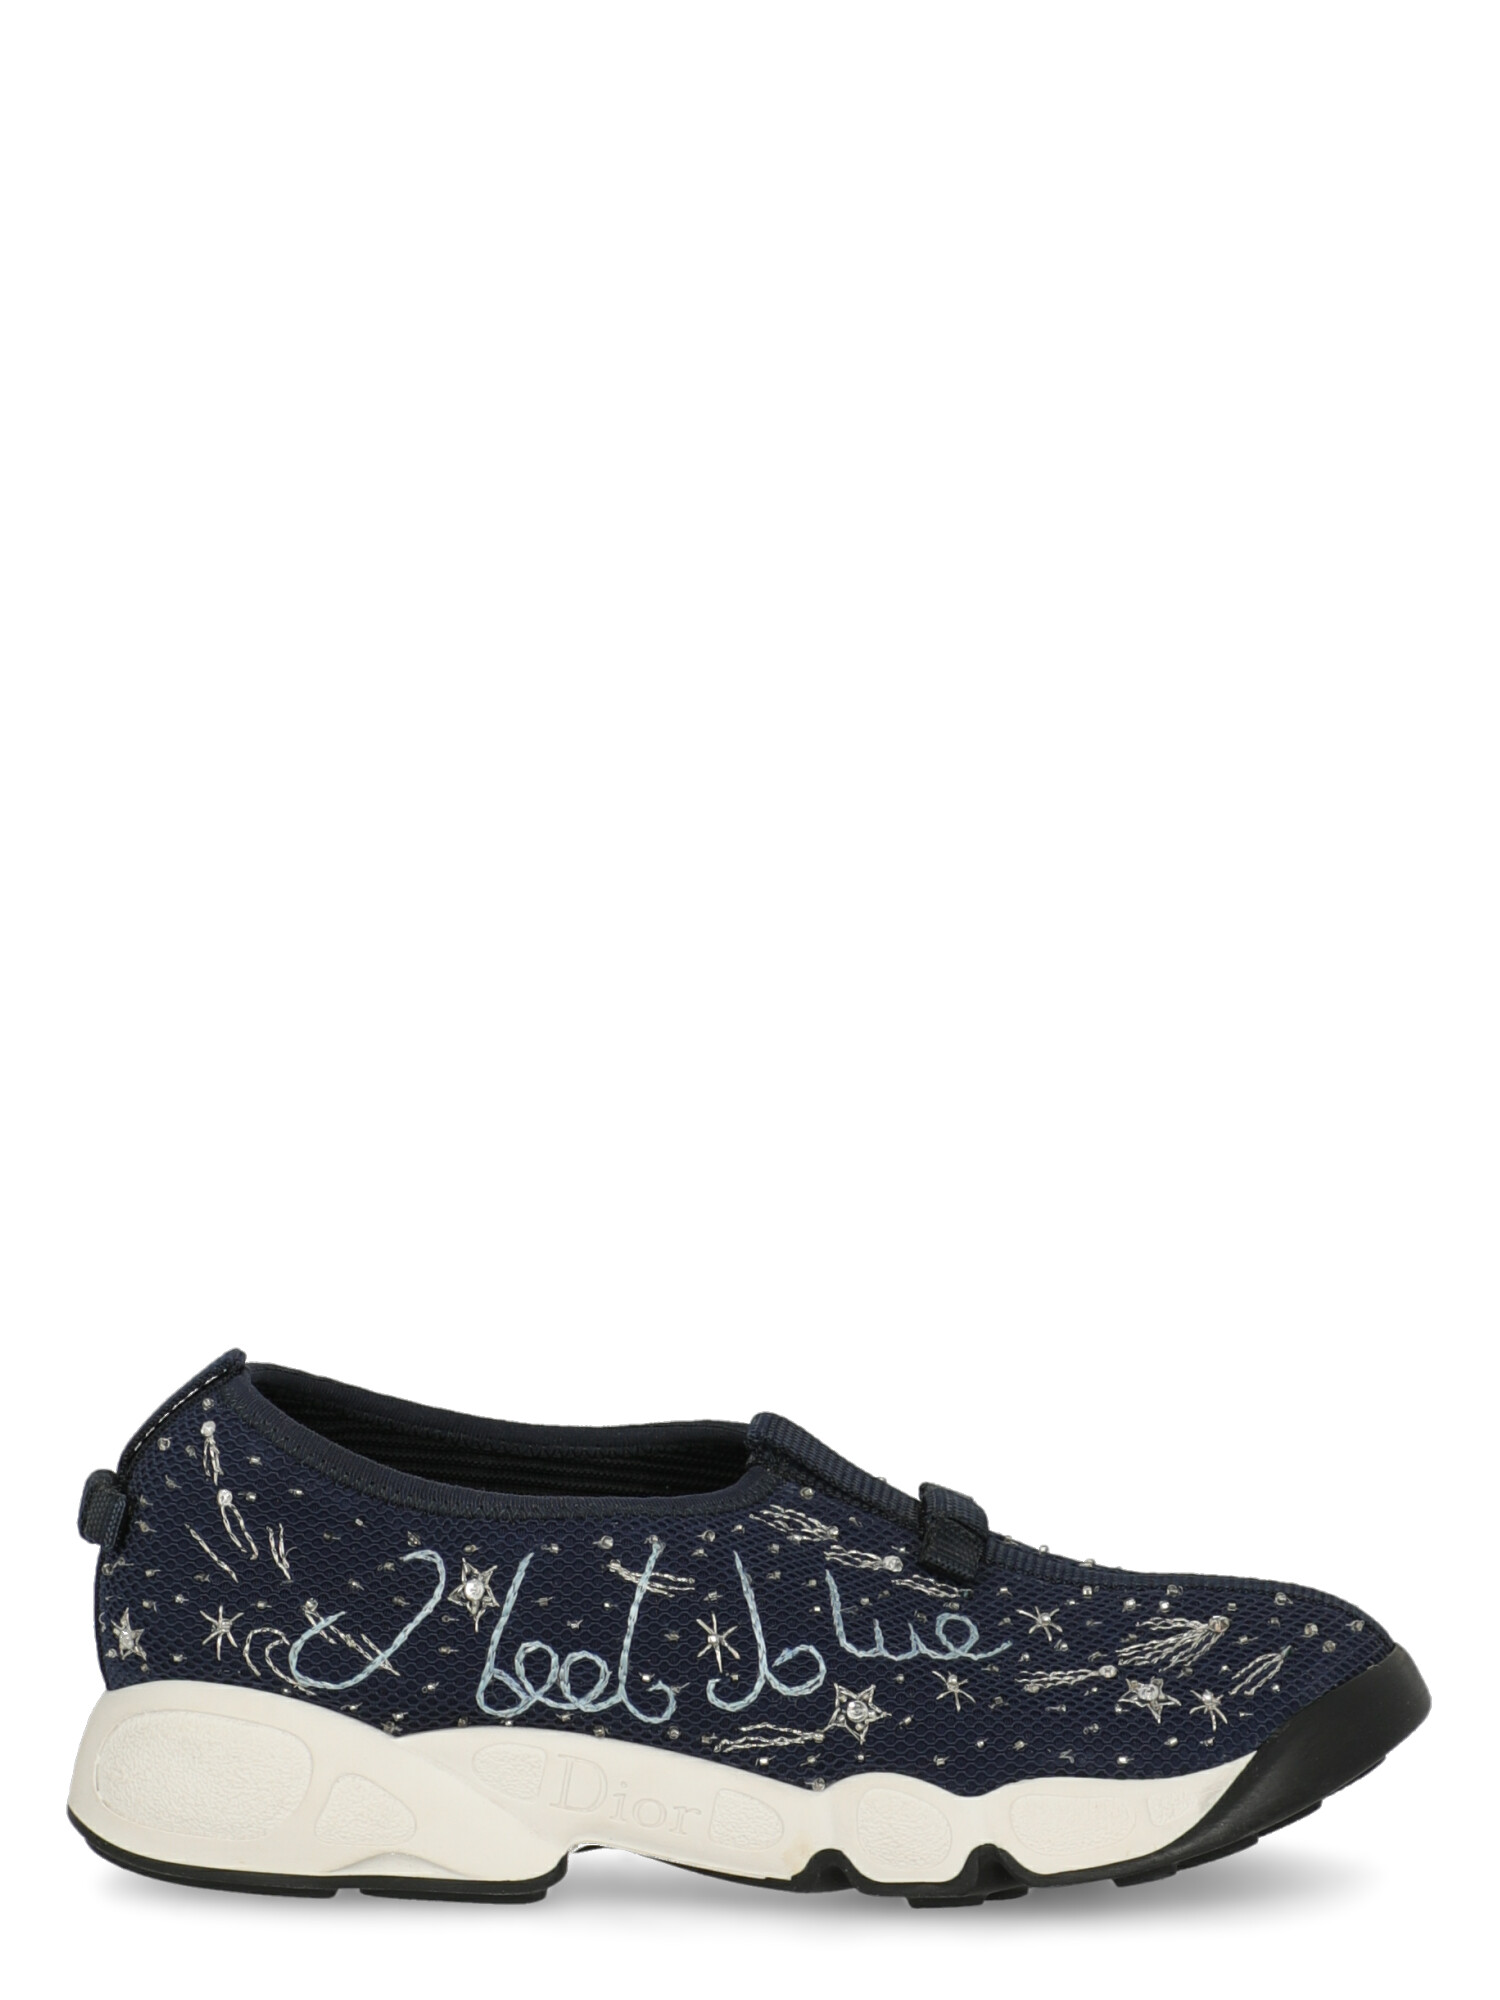 Dior Femme Sneakers Navy Synthetic Fibers